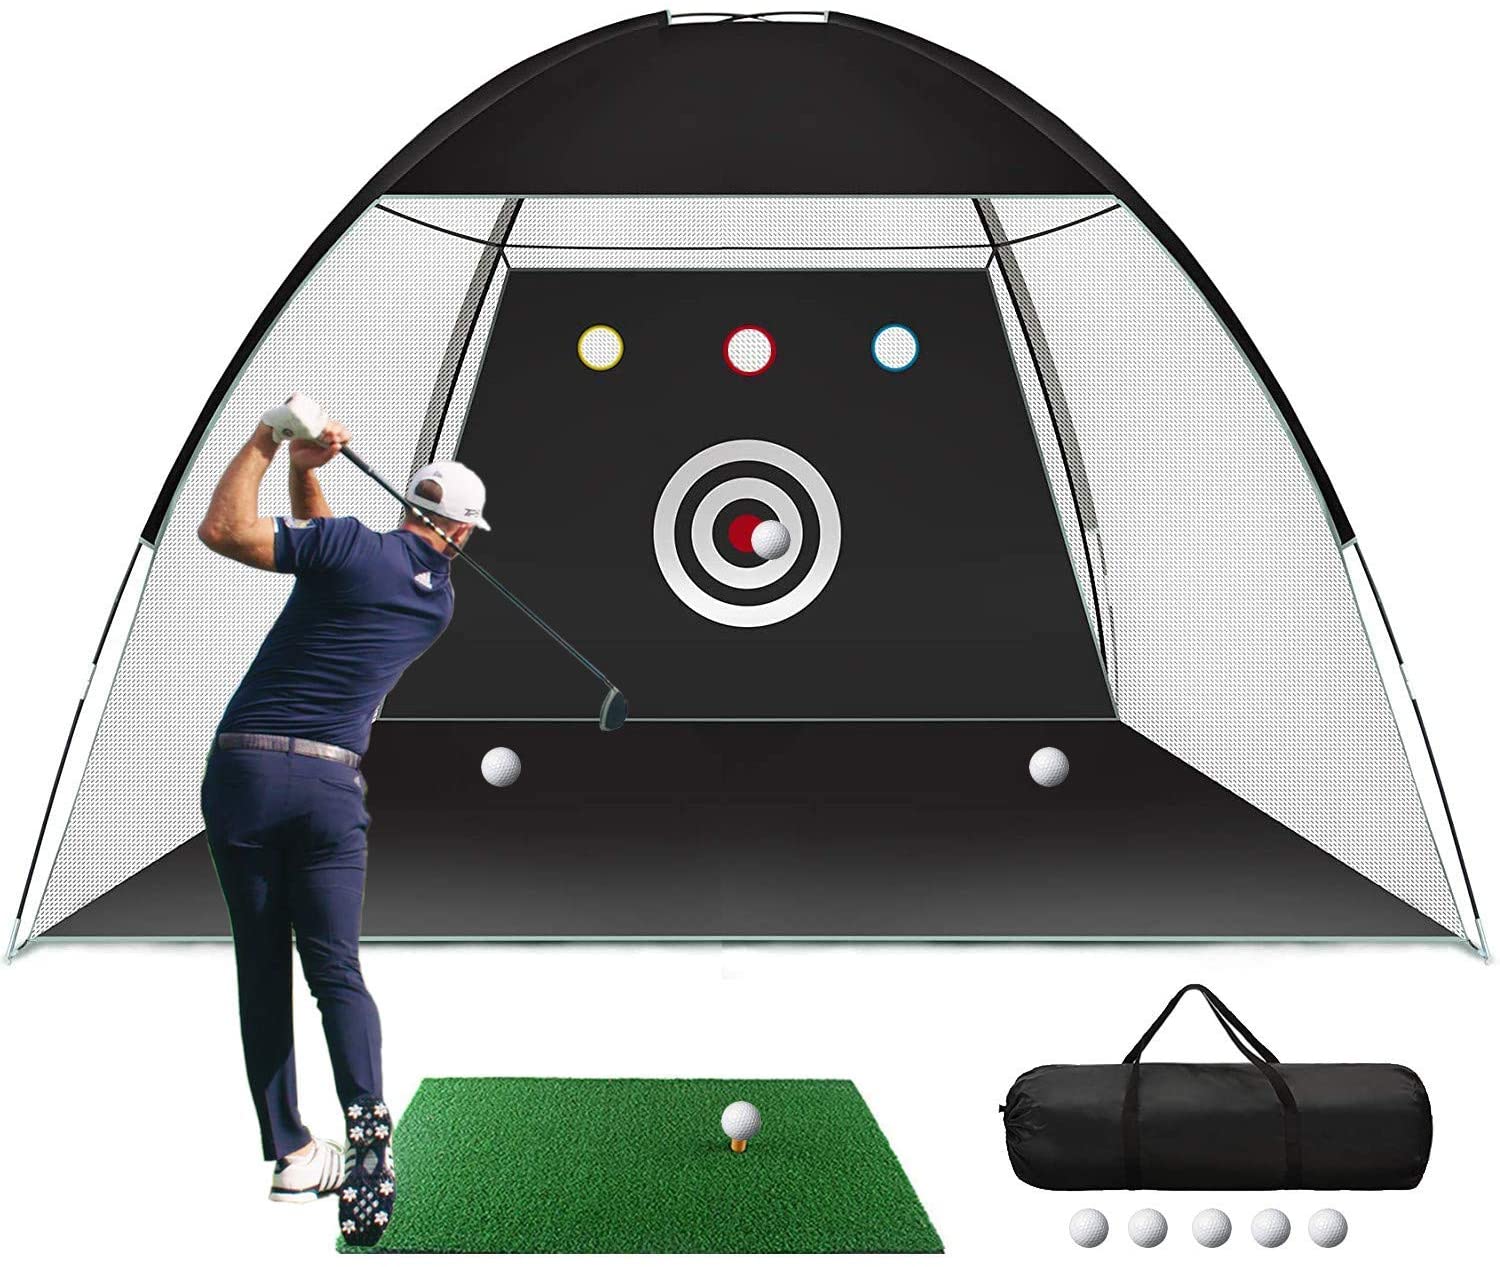 The most popular golf training aids on Amazon (September 2021 